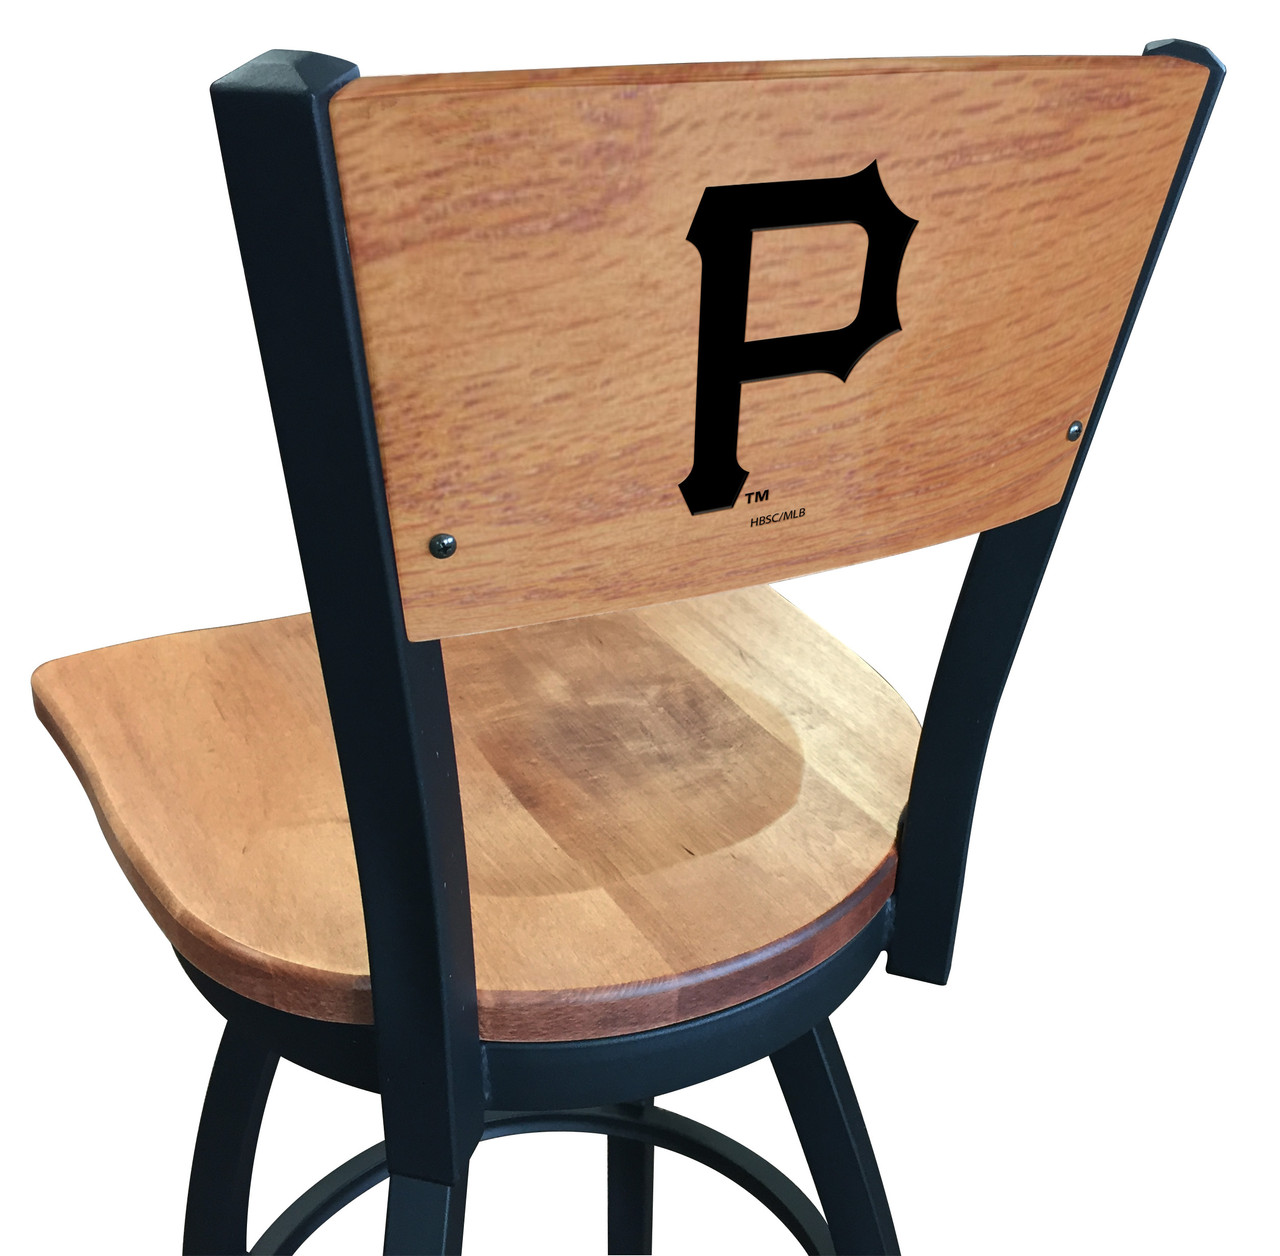 Pittsburg, Pirates, L038, Laser, Engraved, Wood, Back, Counter, Bar, Stool, 25", 30", 36", Maple, Wood, Seat, Holland Bar Stool,PIT, MLB, Fan Cave, Man Cave, L03825BWMedMplAMLBPitMedMpl, 071235084042, L03830BWMedMplAMLBPitMedMpl, 071235084776, L03836BWMedMplAMLBPitMedMpl, 071235085513